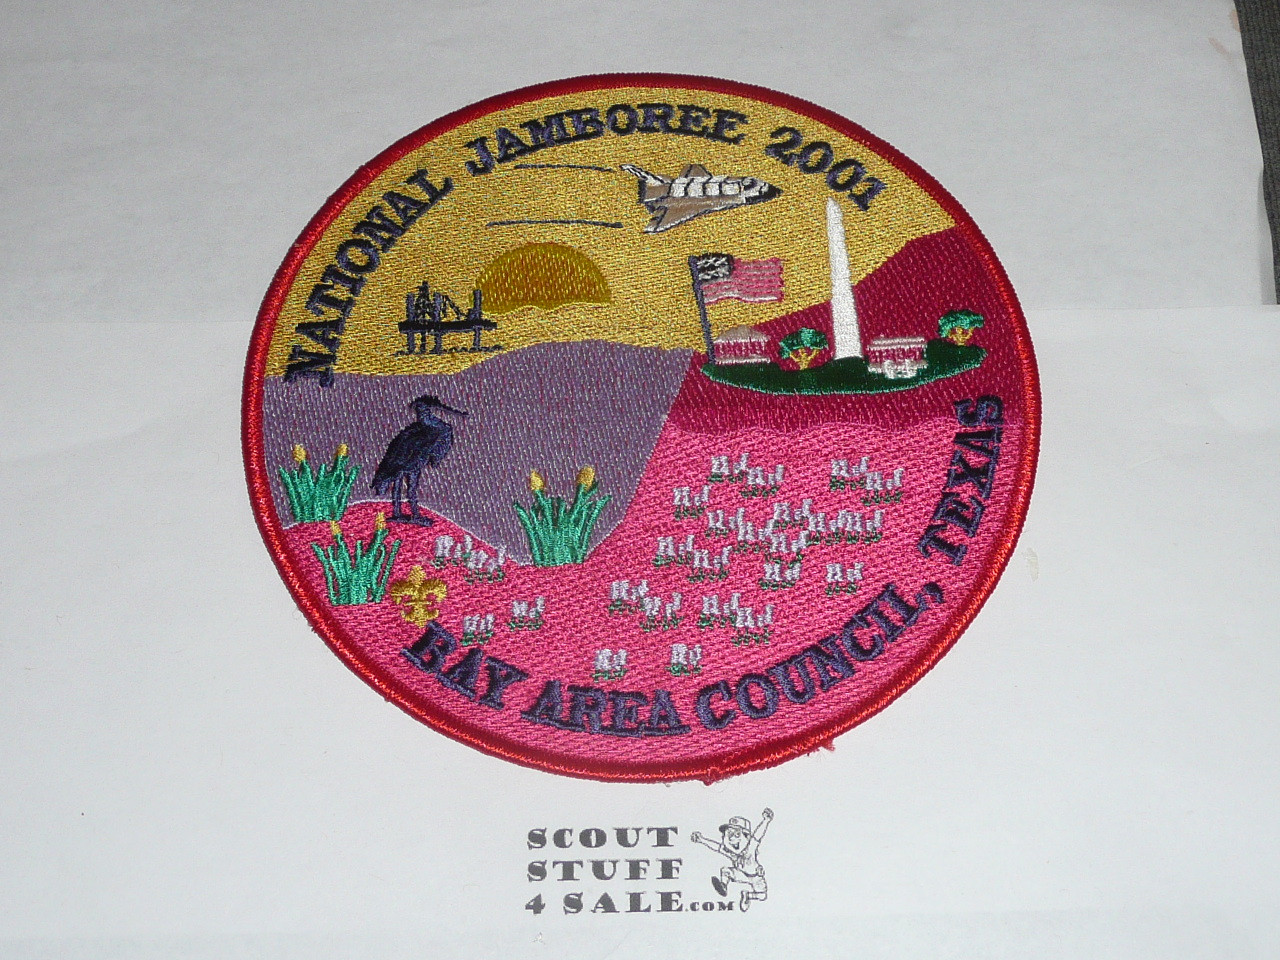 2001 National Jamboree JCP - Bay Area Council Jacket Patch